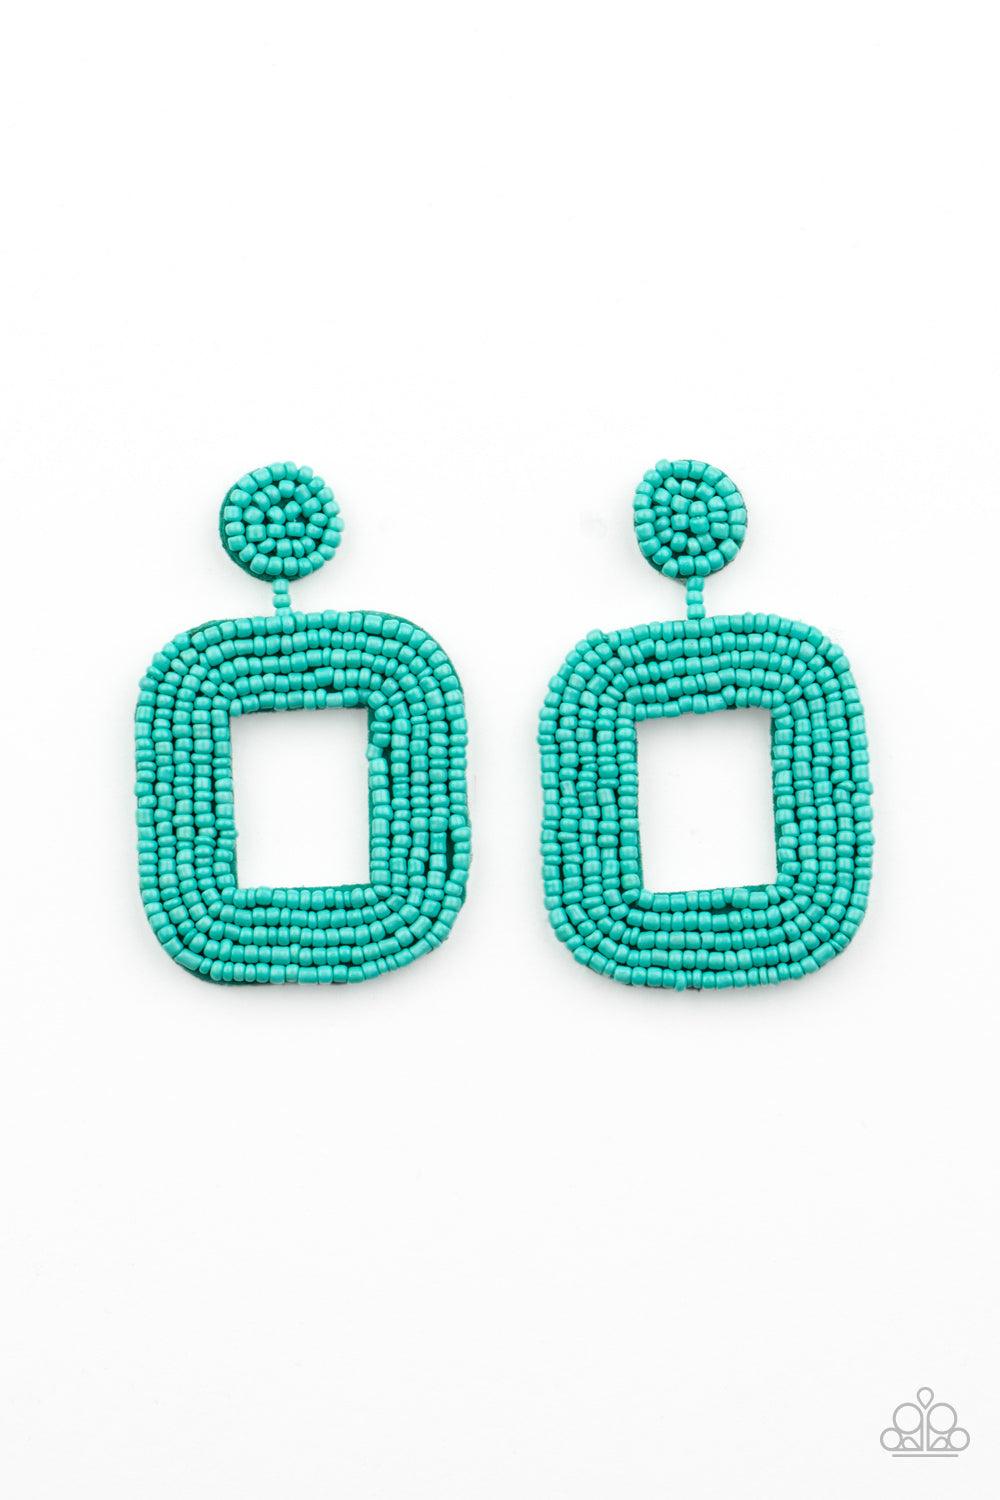 Paparazzi Accessories Beaded Bella - Blue Refreshing rows of dainty turquoise seed beads adorn the front of a rounded square frame at the bottom of a matching beaded fitting, creating a blissfully beaded look. Earring attaches to a standard post fitting.